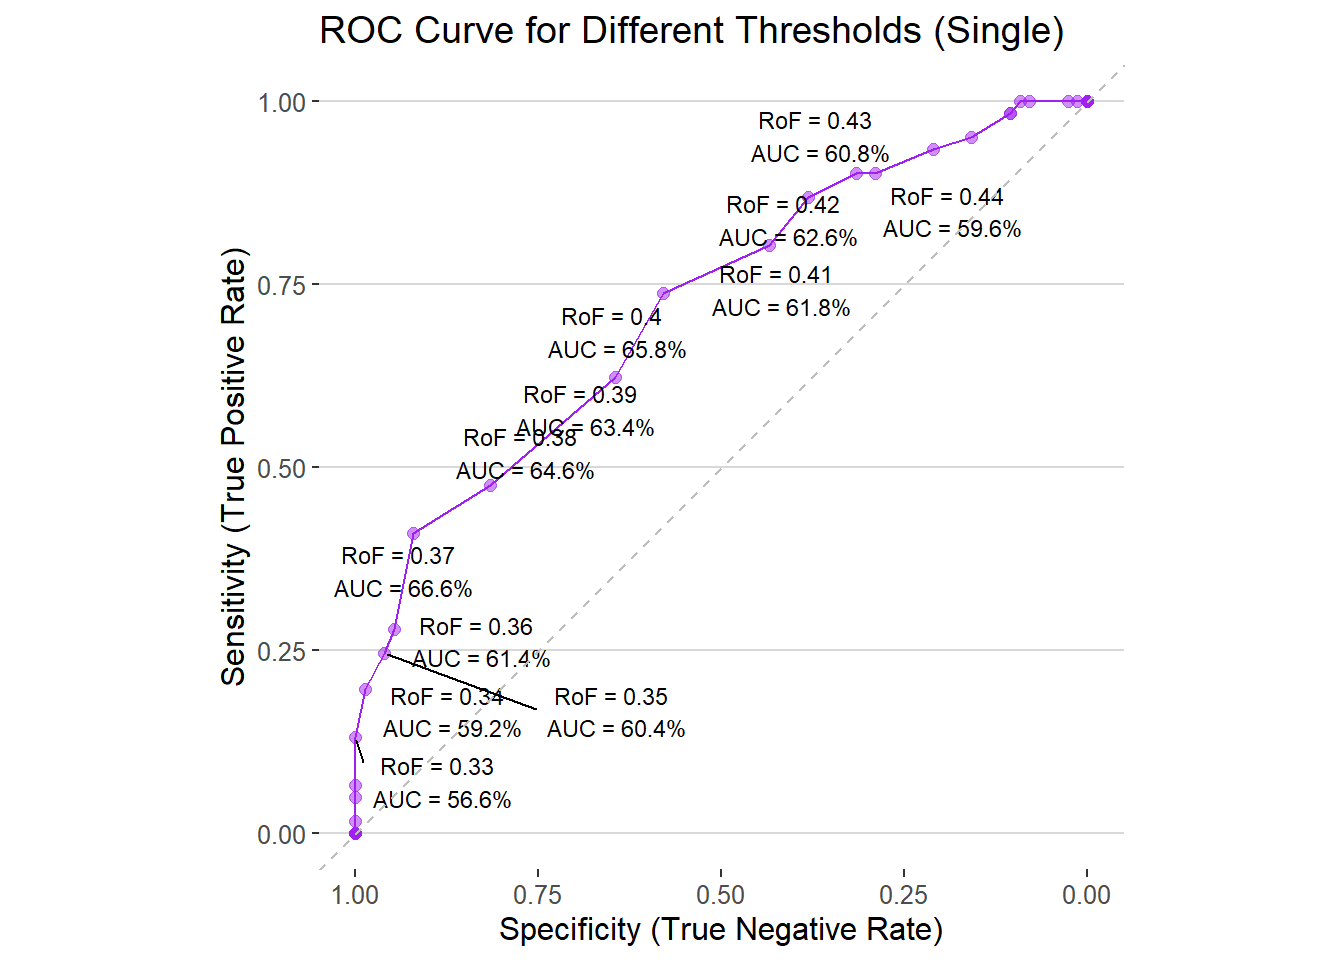 Classification Accuracy for different RoF thresholds